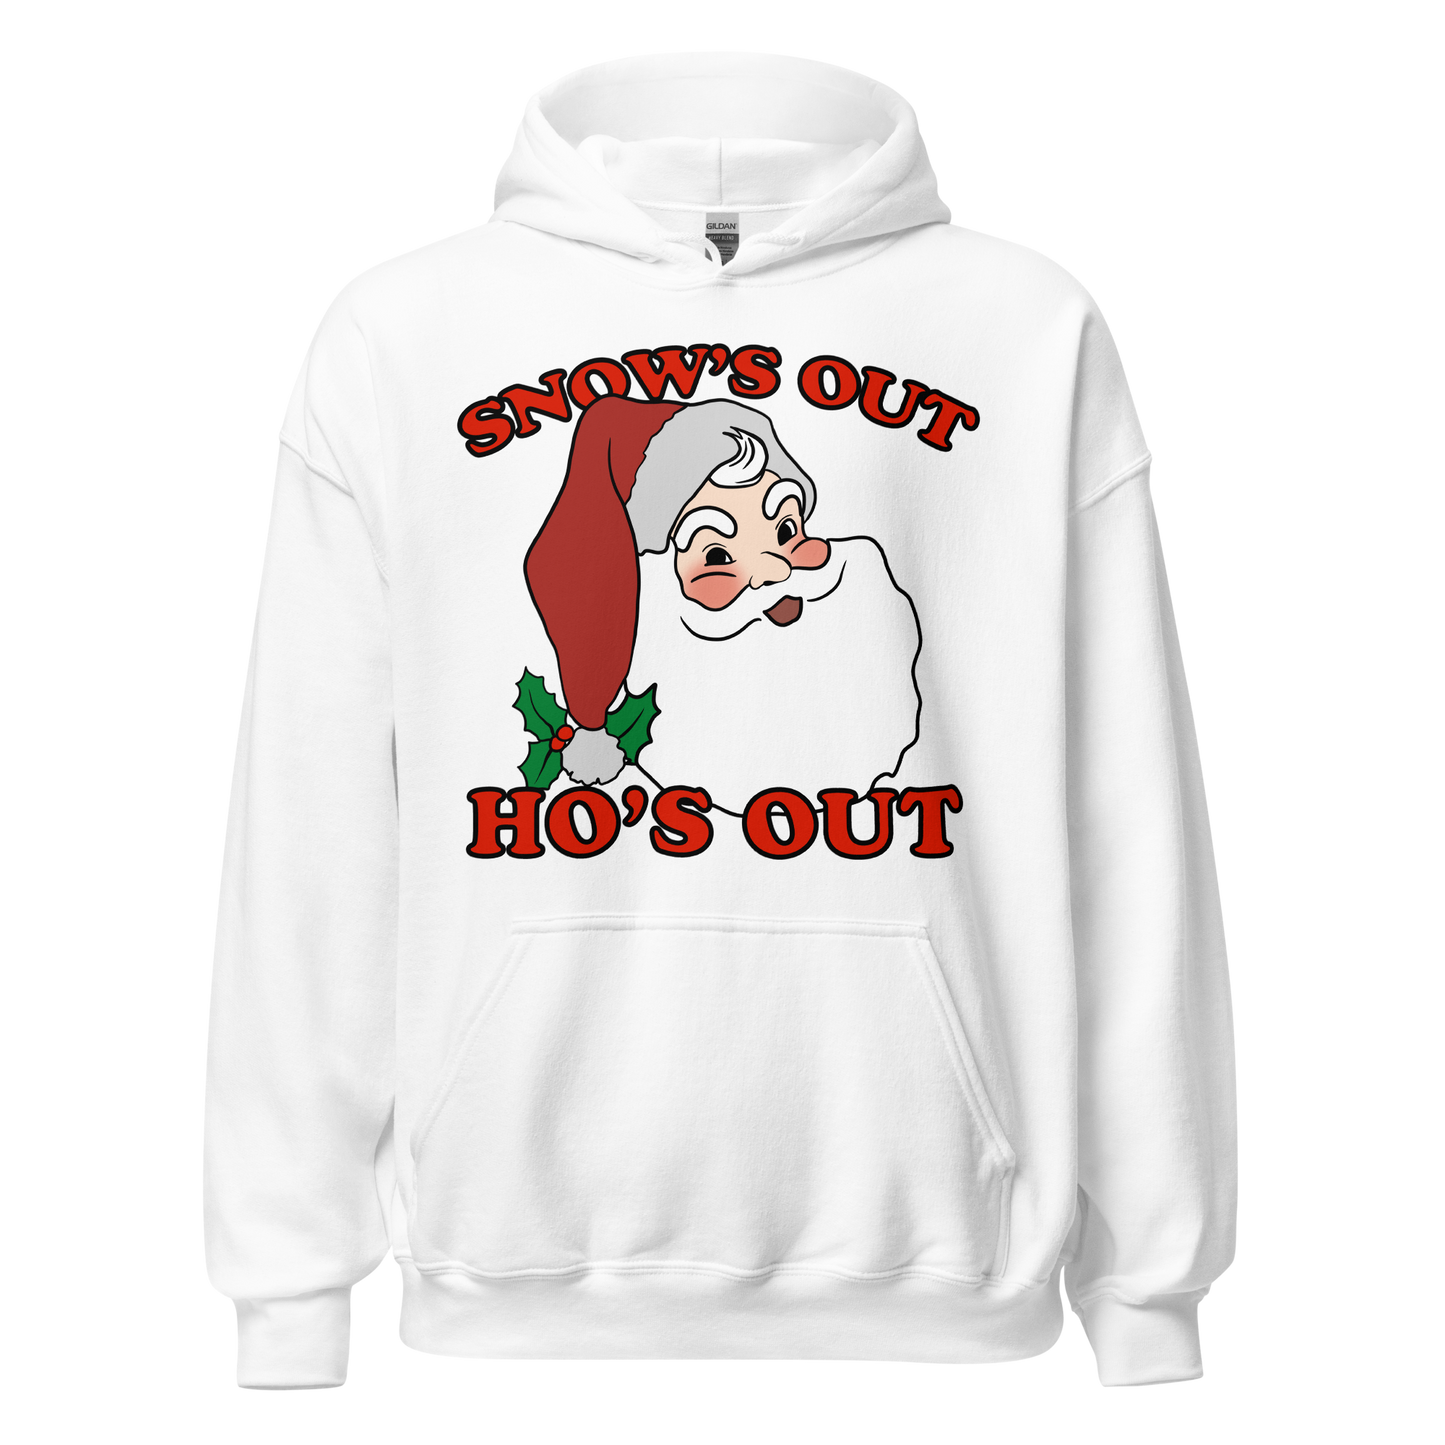 Snow's Out, Ho's Out Hoodie